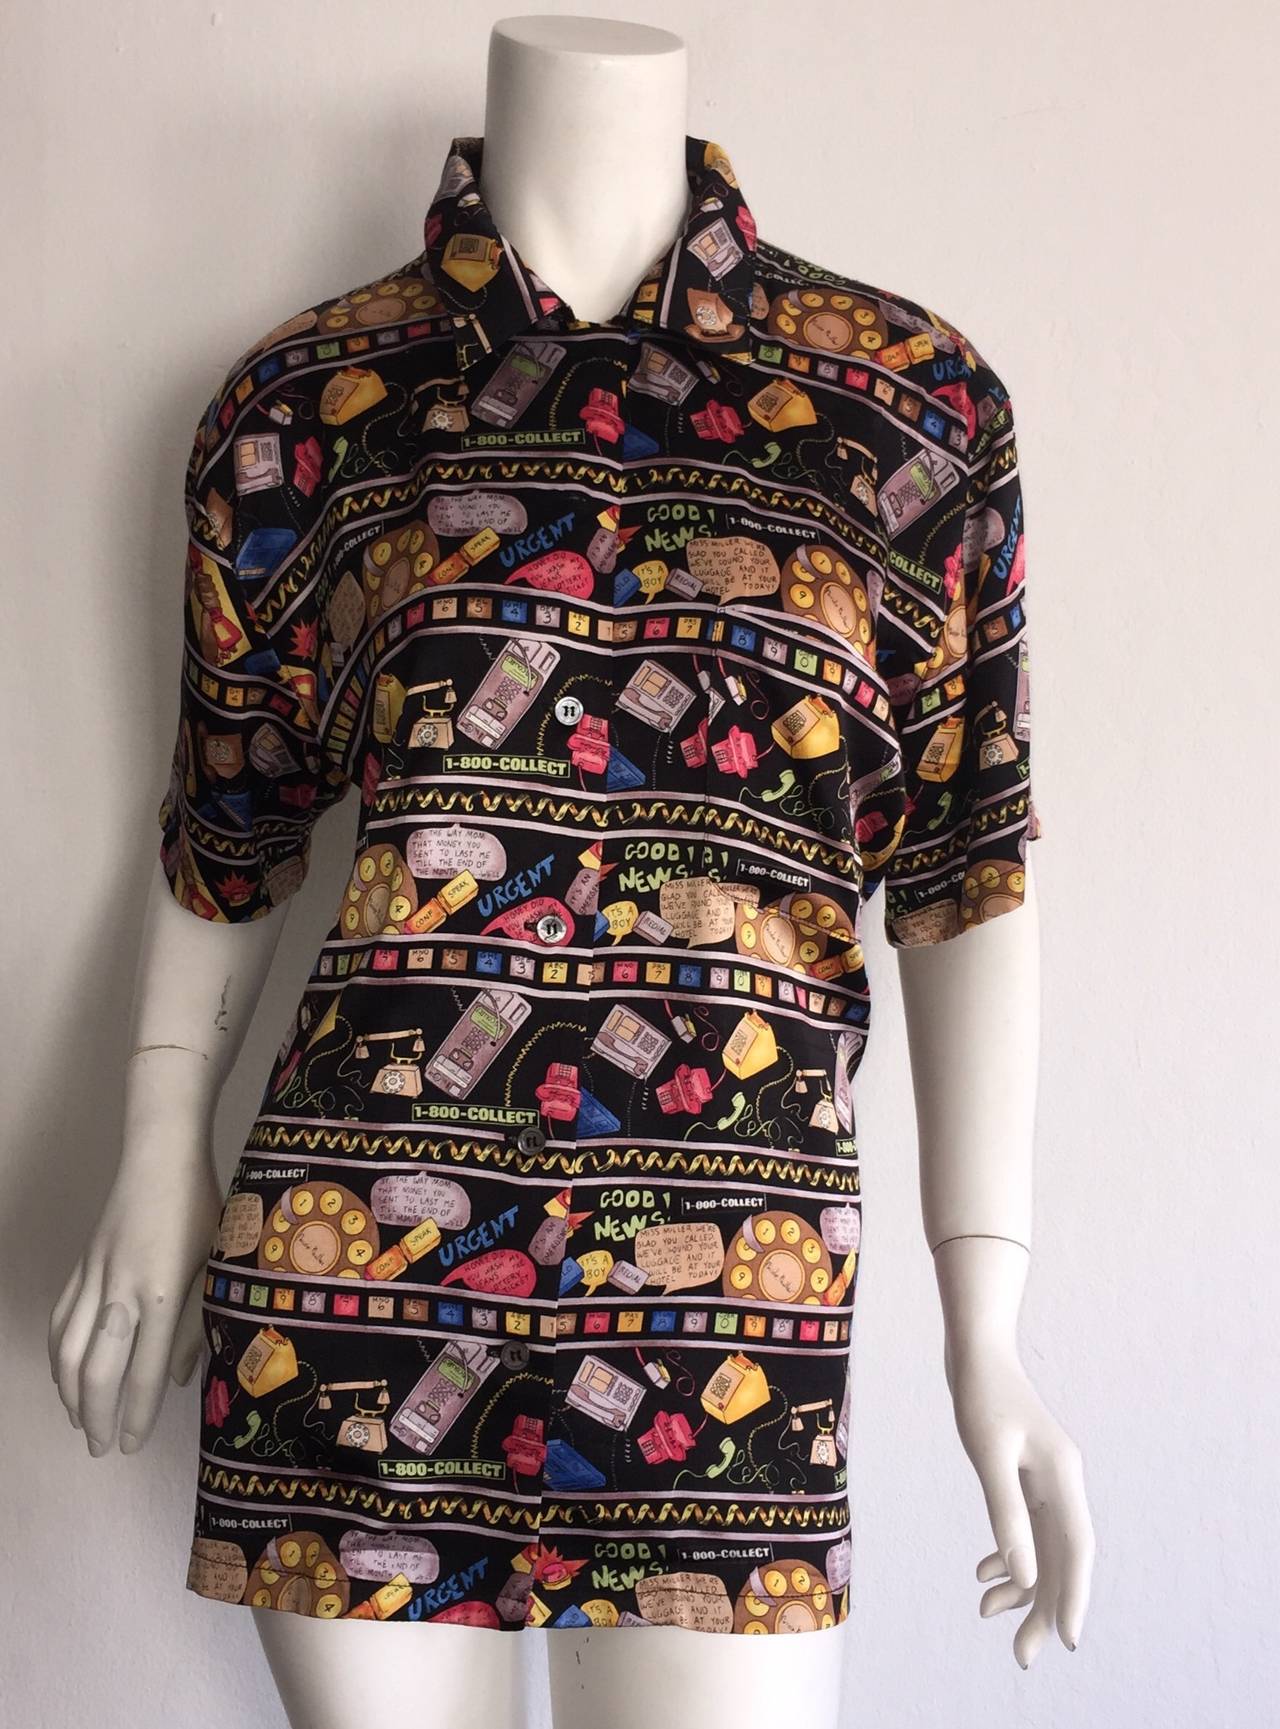 Amazing vintage Limited Edition Nicole Miller silk blouse! Novelty telephone '1-800-Collect' print, with humorous bubble thoughts printed throughout. Can be worn a number of ways, and looks great belted. Only limited quantities of this beauty were